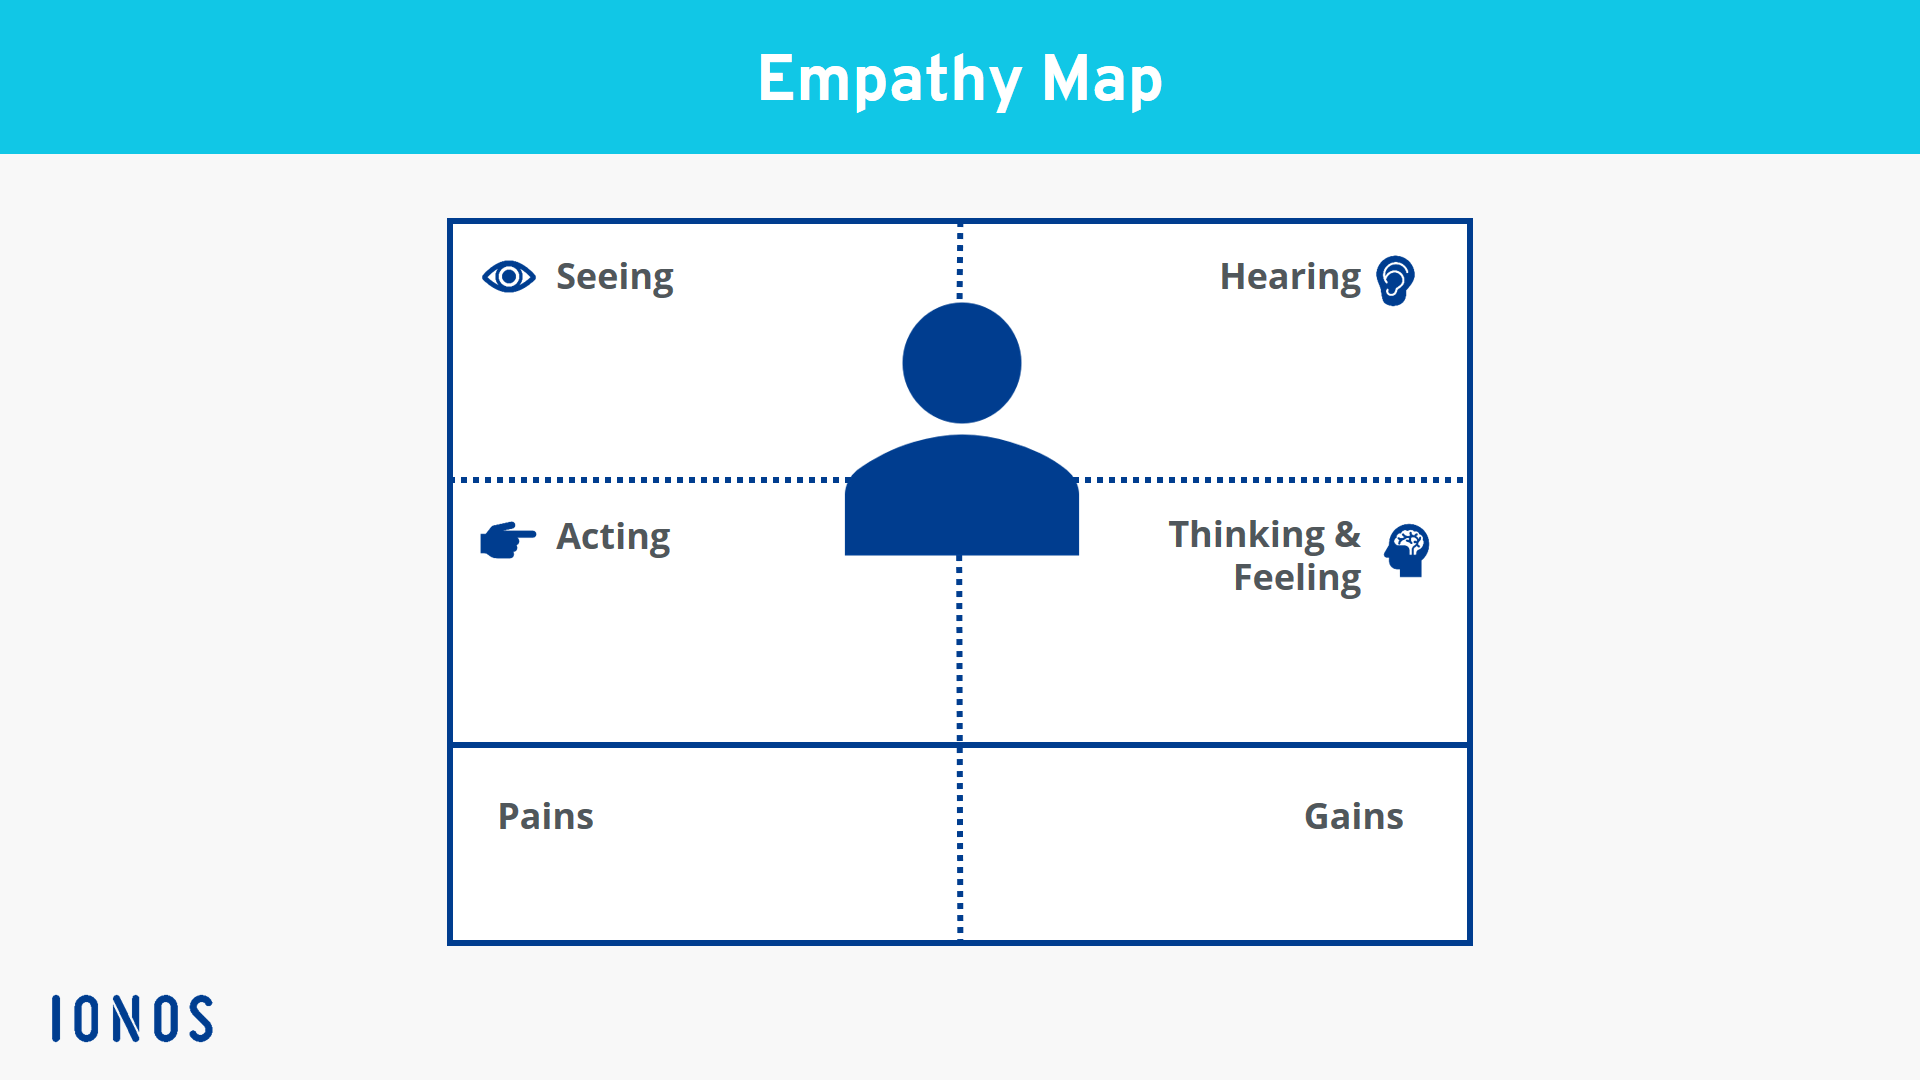 Structure of the empathy map